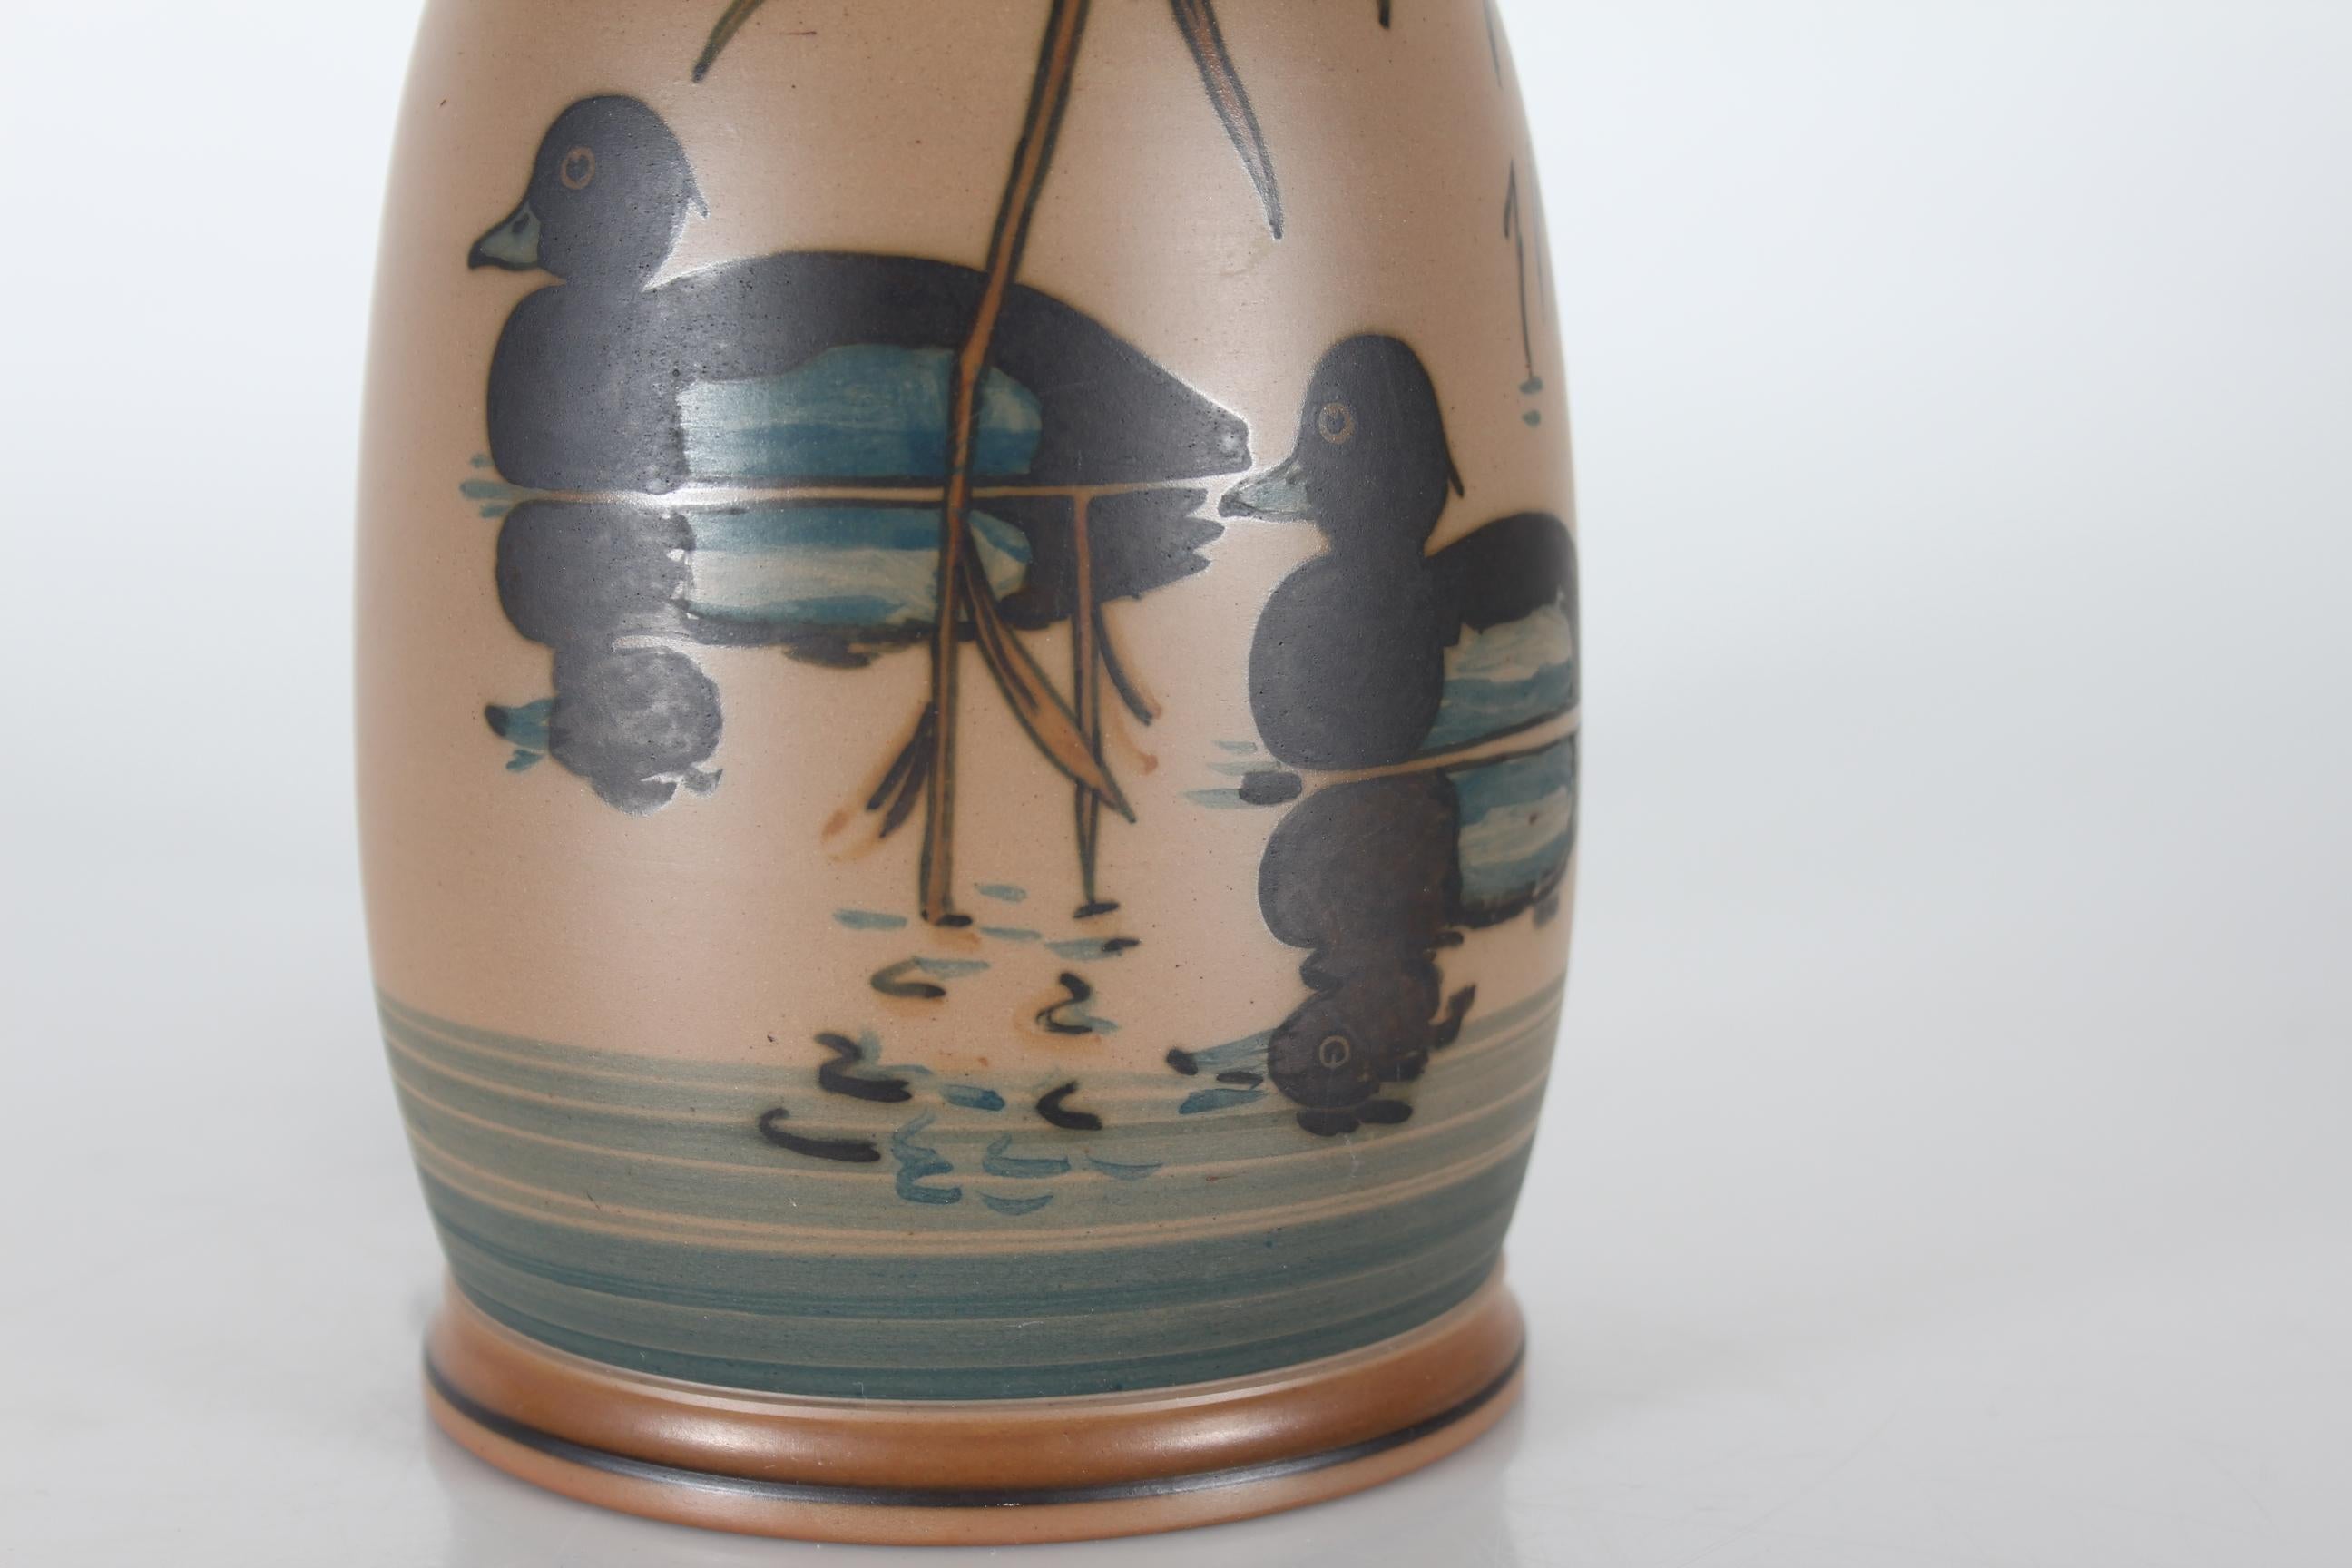 Mid-20th Century Danish Art Deco Table Lamp by L. Hjorth Ceramic, with Swimming Ducks + Le Klint For Sale